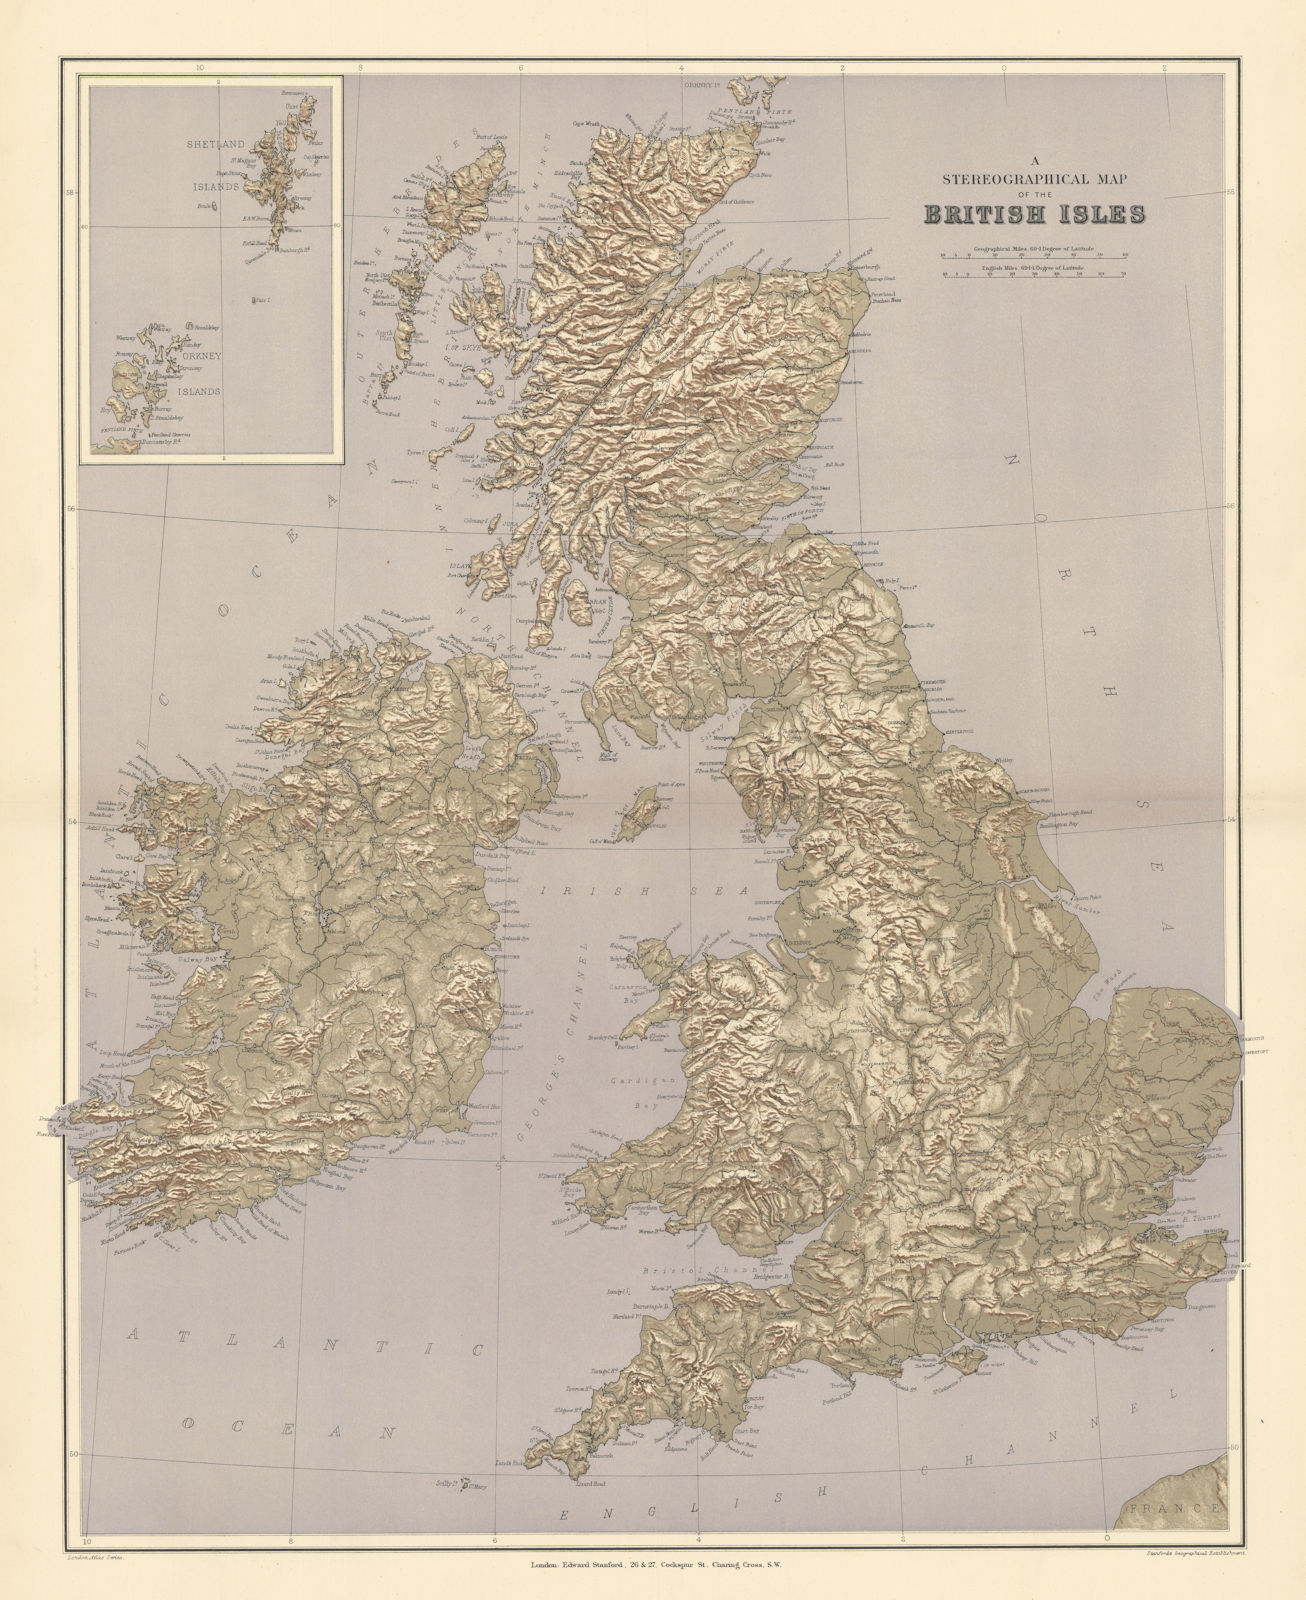 Associate Product British Isles Stereographical. Mountains rivers. Large 65x52cm STANFORD 1896 map